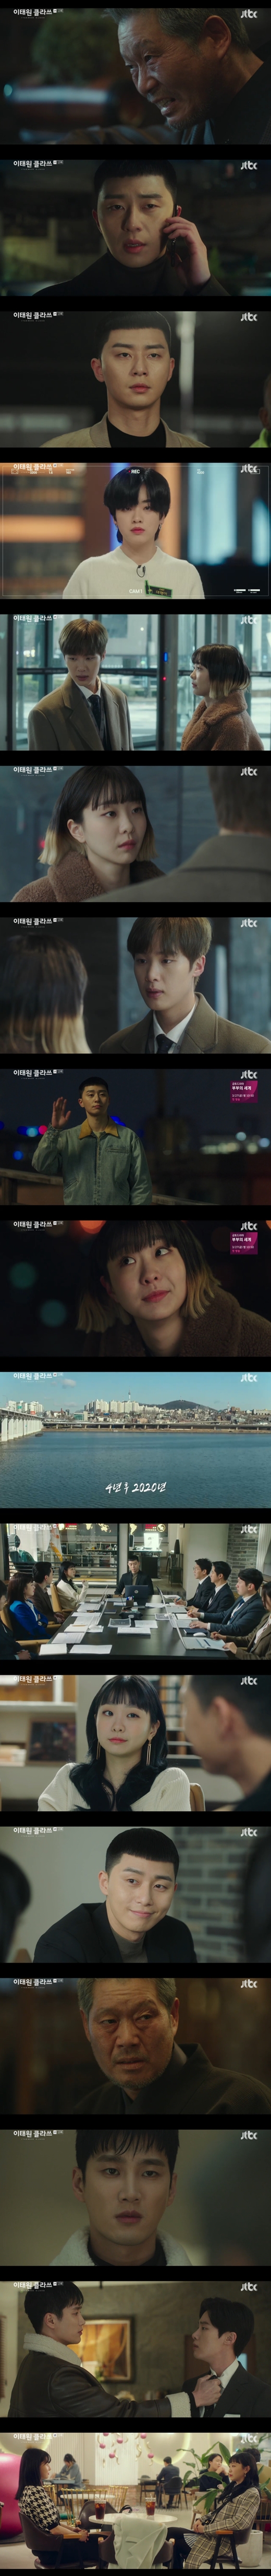 Jang Dae-hee (Yoo Jae-myung) was judged to be a deadline.13 episodes of JTBCs gilt drama Itaewon Klath (playplayed by Cho Kwang-jin, directed by Kim Sung-yoon) were broadcast on the night of the 13th.Jang Geun-soo (Kim Dong-hee) used the fact that Ma Hyun-yi (Lee Joo-young) was transgender. But Ma Hyun-yi did not collapse. I am transgender.And I will win today, he declared, I am standing here with the heart of those who made me hard, and to repay them with delicious food. The result is a happy ending. Ma Hyun beat Jangga and won the strongest car survival.Joy (Kim Dae-mi) was angry before Jang Geun-soos cowardly revelations. Joy, who visited Jang Geun-soo, said, Be like you, you look good, but Jang Geun-soo said, I can not stop now.I like you so much, he confessed, and foreshadowed a new runaway.While Jang Geun-soo has solidified his position as the successor to Jangga, Park Seo-joon has continued his step toward the top of the Korean foodservice industry.Four years later, he became the CEO of the company IC, which had grown unknowingly. Joy, Choi Seung-kwon (Ryu Kyung-soo), and Ma Hyun-yi remained by him.The love of Roy, who shouted My heart is my heart, my right, remained, as did the nerve warfare between Joy and Oh Su-a (Kwon Nara).Meanwhile, over four years, Jang Dae-hees health has deteriorated noticeably - pancreatic cancer.Jang Geun-won (Security), who was released from prison, was angry at Jang Geun-soos appearance of thinking about Janggas stock price before his fathers health.Park also found out that Jang Dae-hee was given a deadline. Park called Jang Dae-hee after learning this. Park said, You have cancer? Are you dying?I dont think you should go this easily. Punishment? Anyones choice. You should be punished by me.Dont die yet, he said, flying the lasts Professional Government of the Republic of Kor: The only person I want to live with is the Park.Thats funny, Jang Dae-hee said.